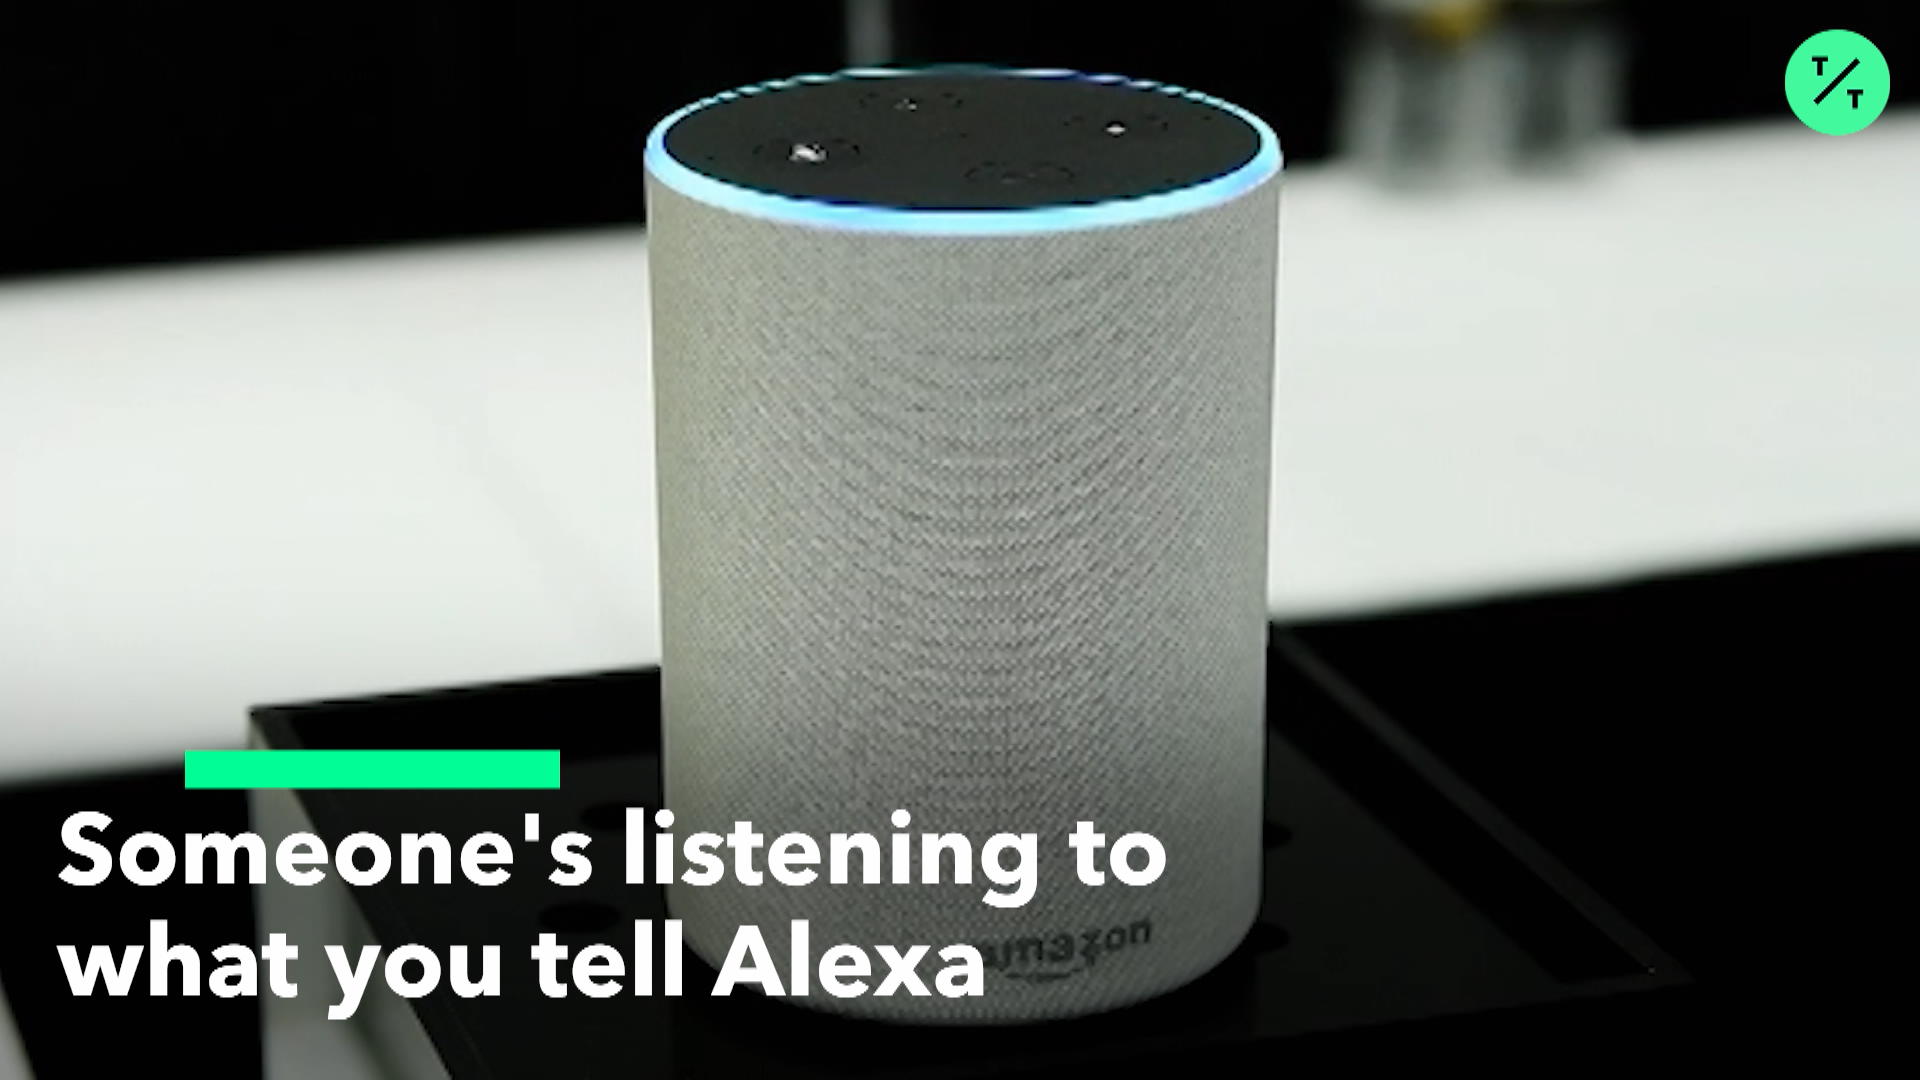 Is Alexa Listening?  Echo Sent Out Recording of Couple's Conversation  - The New York Times